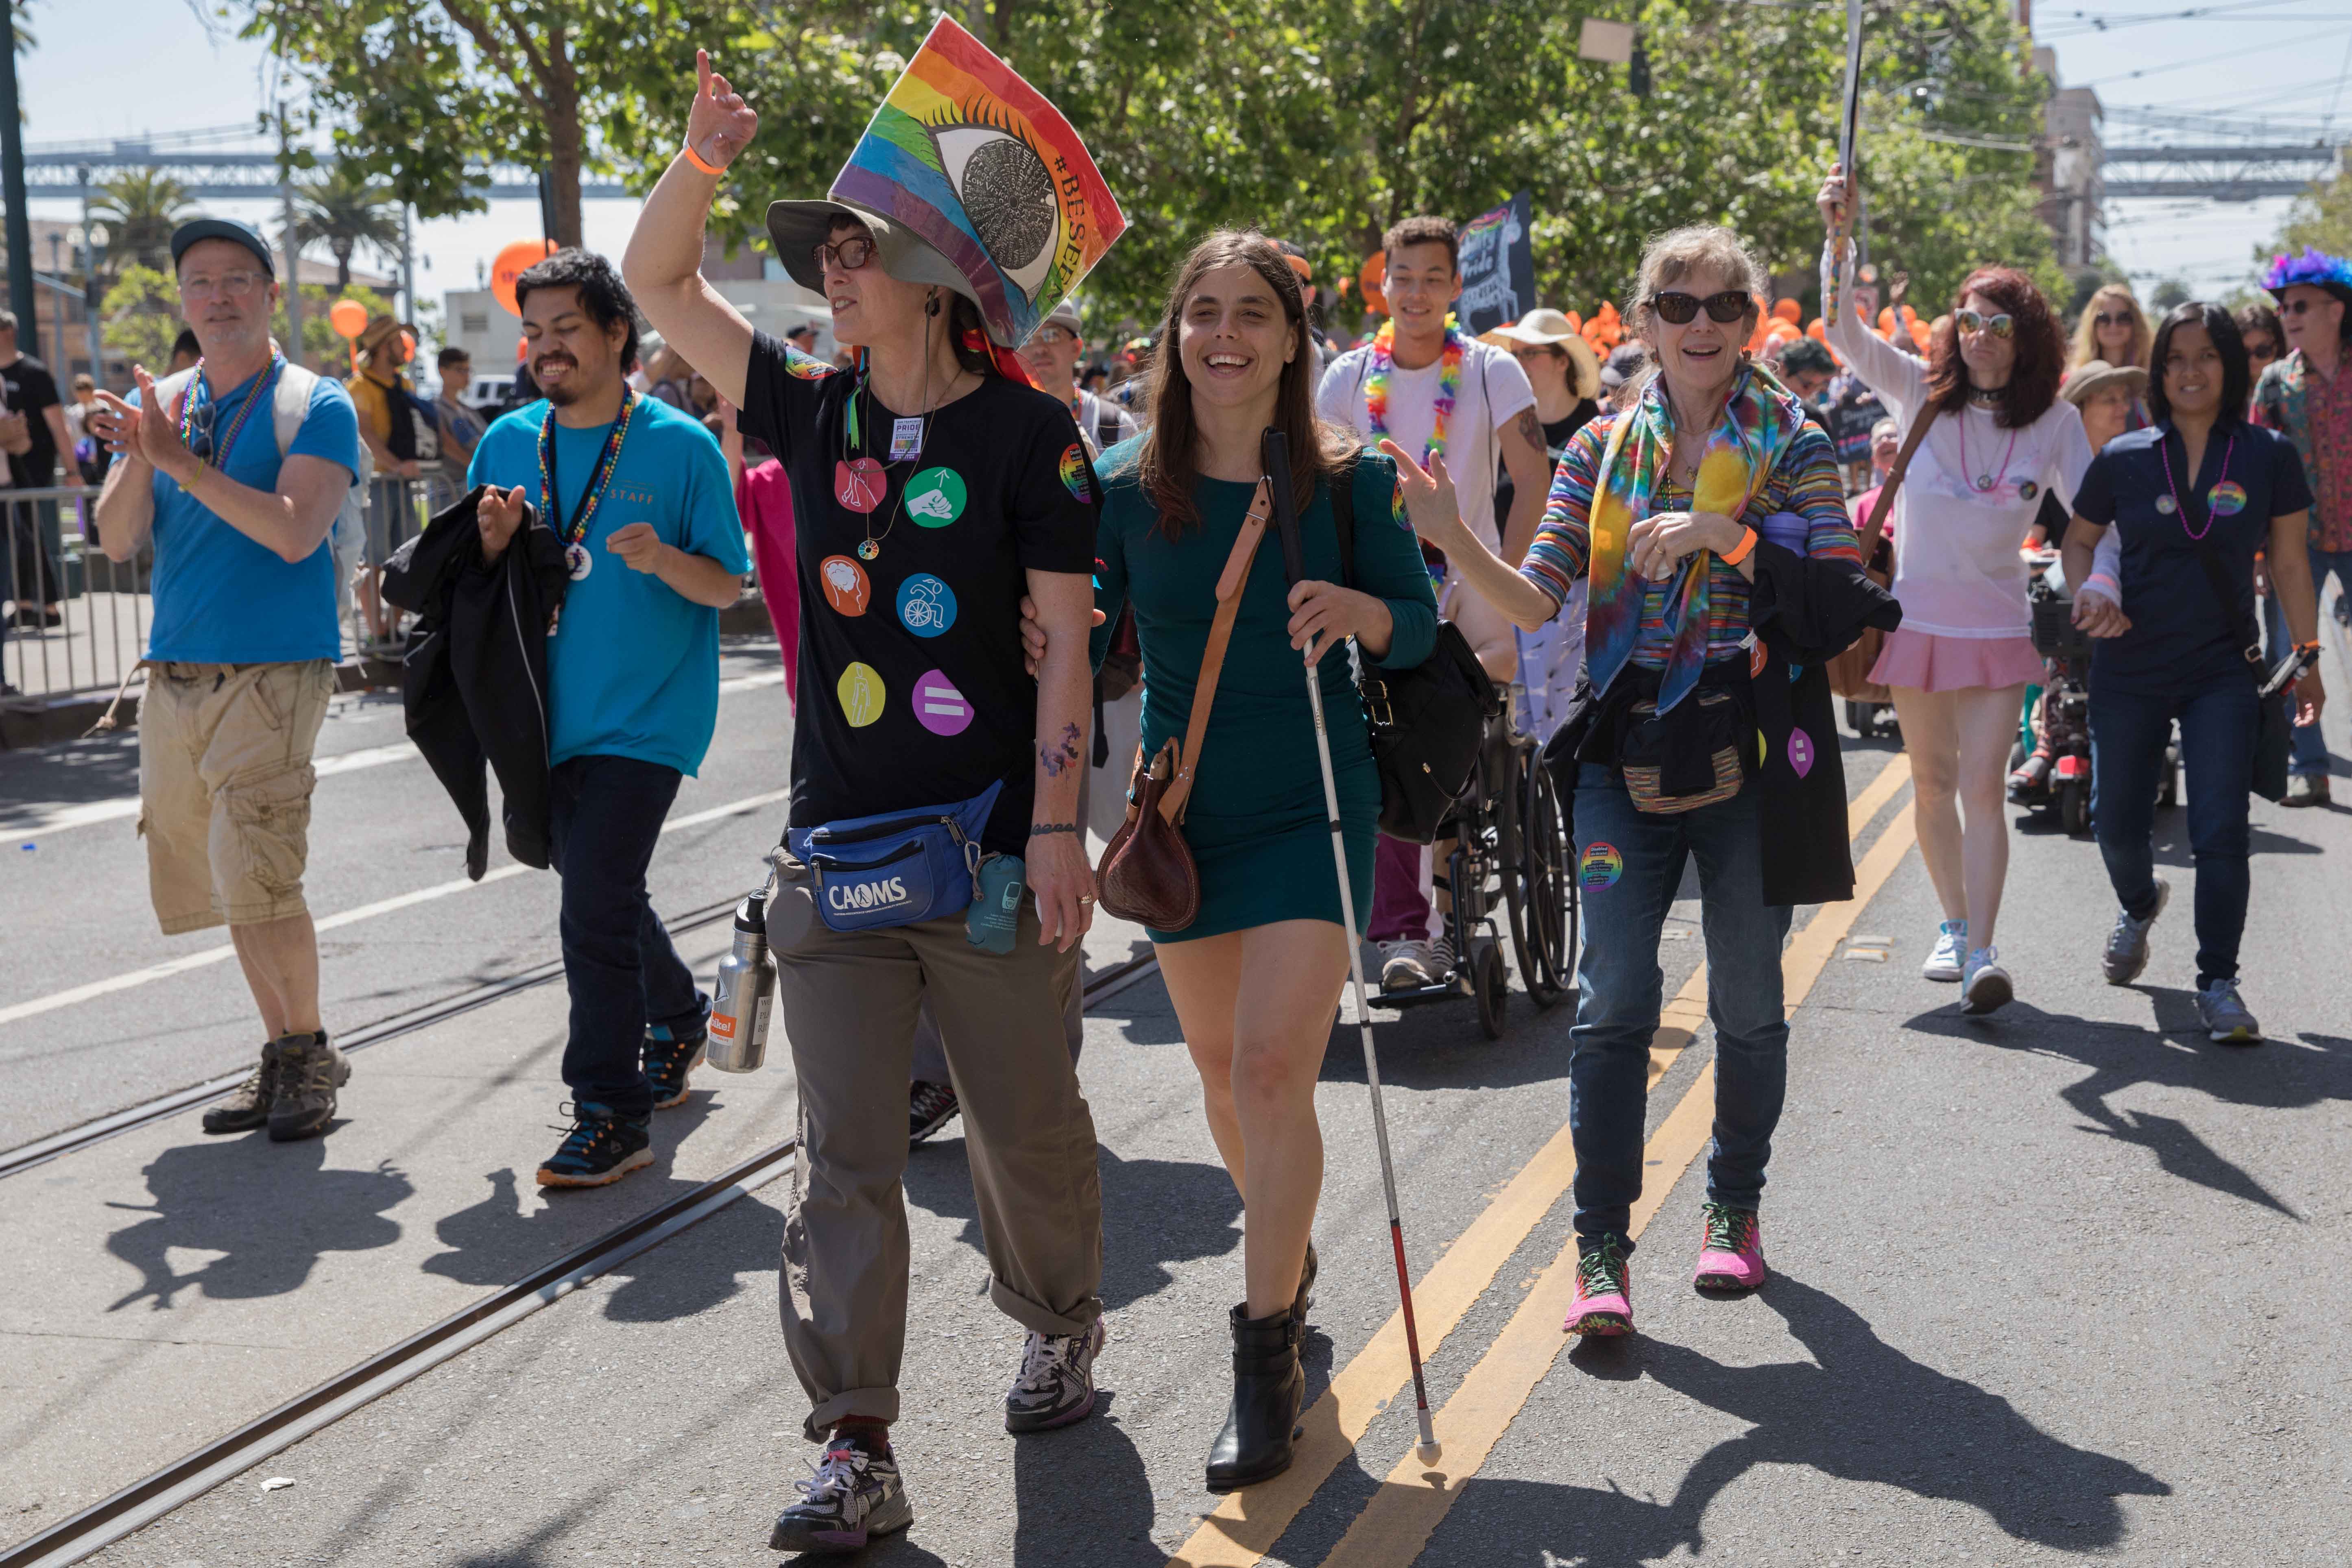 A pride participant with a cane walk side by side in the midst of our large Pride contingent.